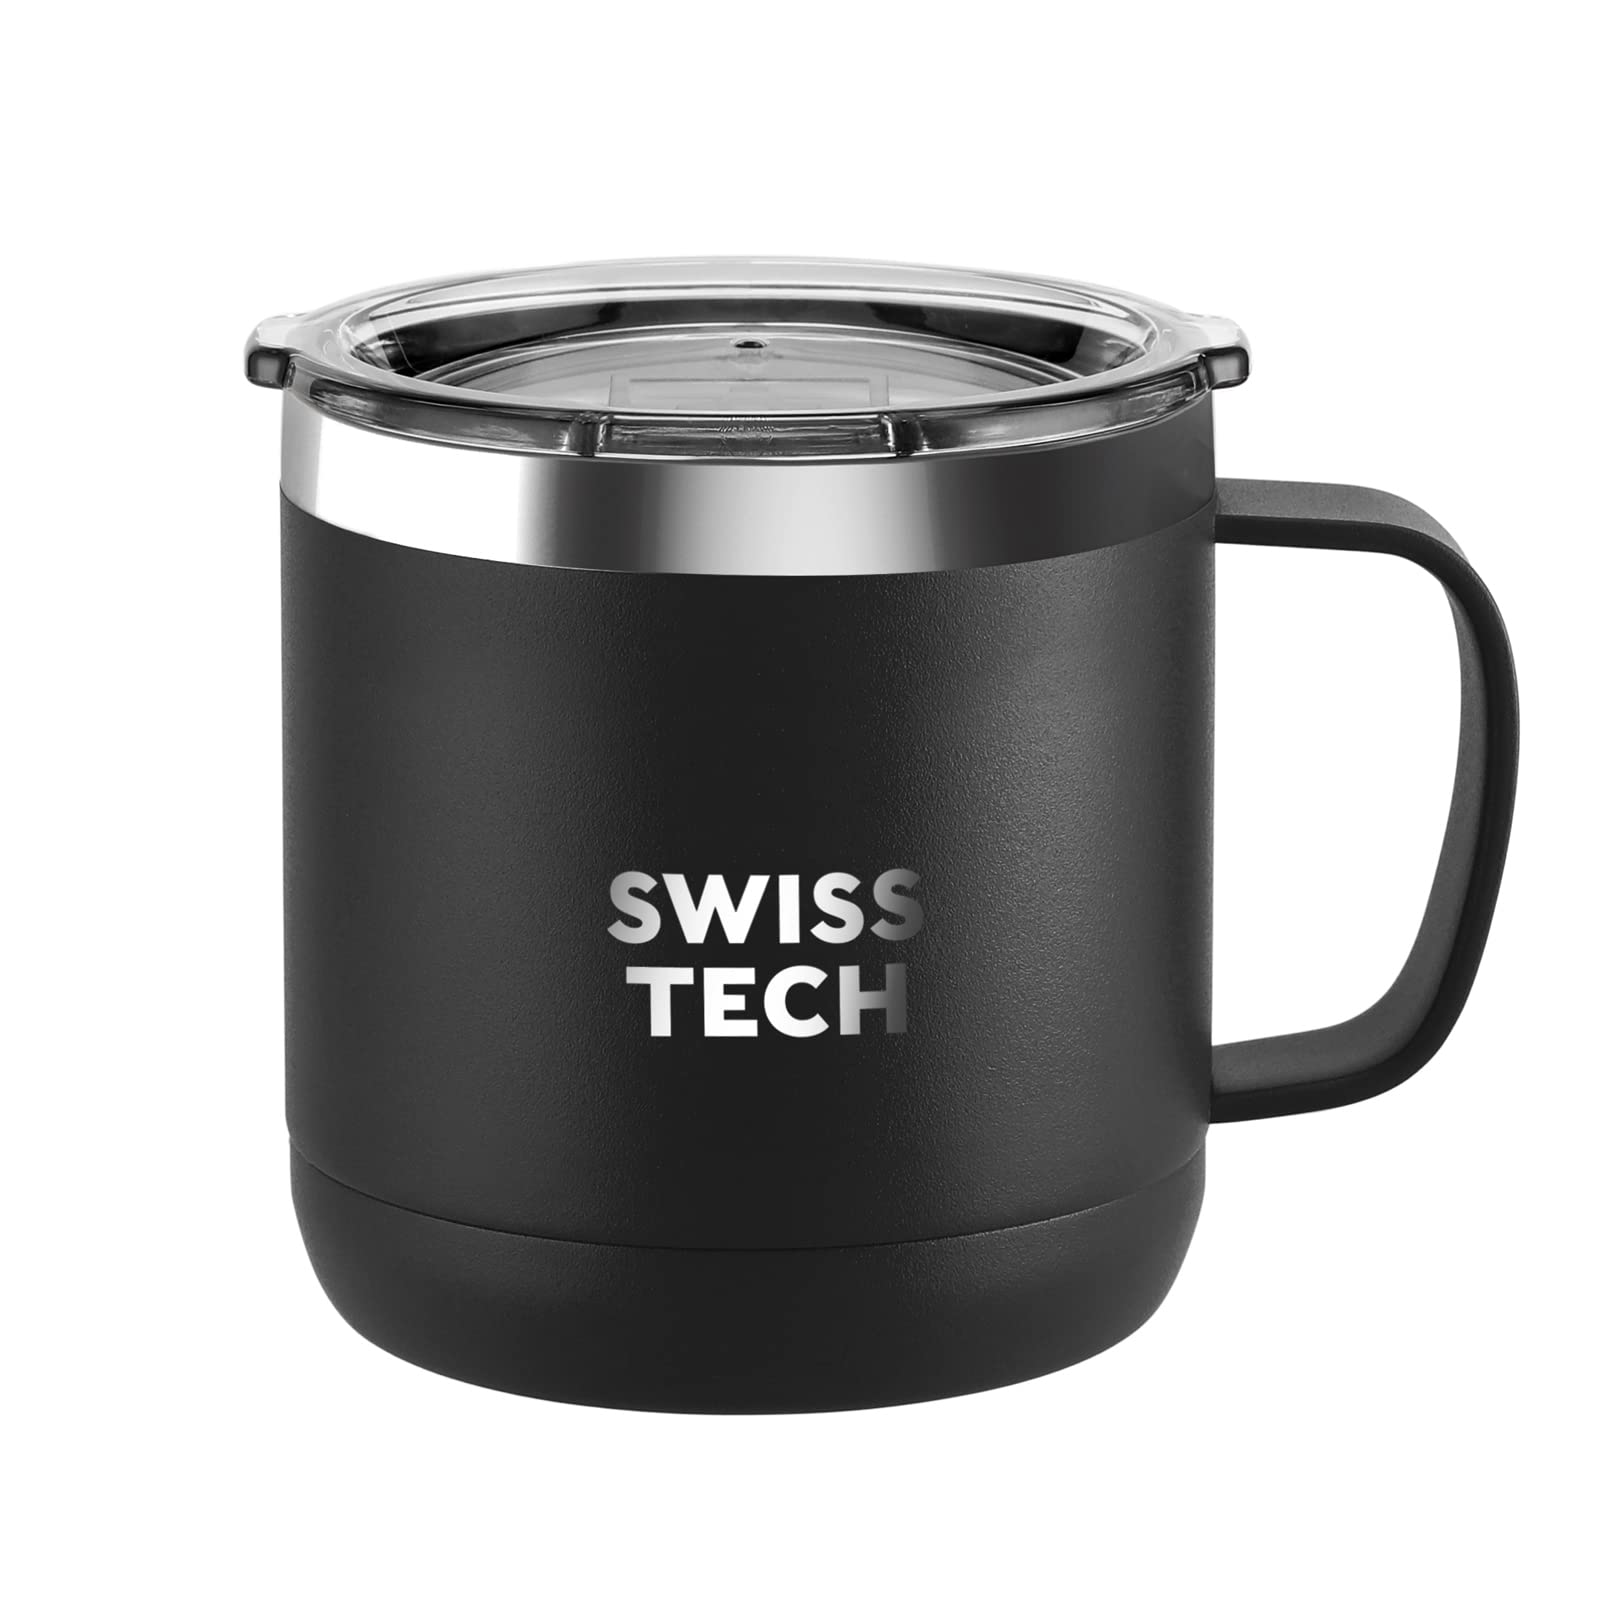 SWISS+TECH Stainless Double Wall Vacuum Insulated Tumbler with Lid, Color/Size options:  30oz - White, Turquoise, Black and Red, 20oz - White, Turquoise, Black and Red, 14oz Mug-White, Turquoise and Black, 10oz - White, Turquoise, Black and Red